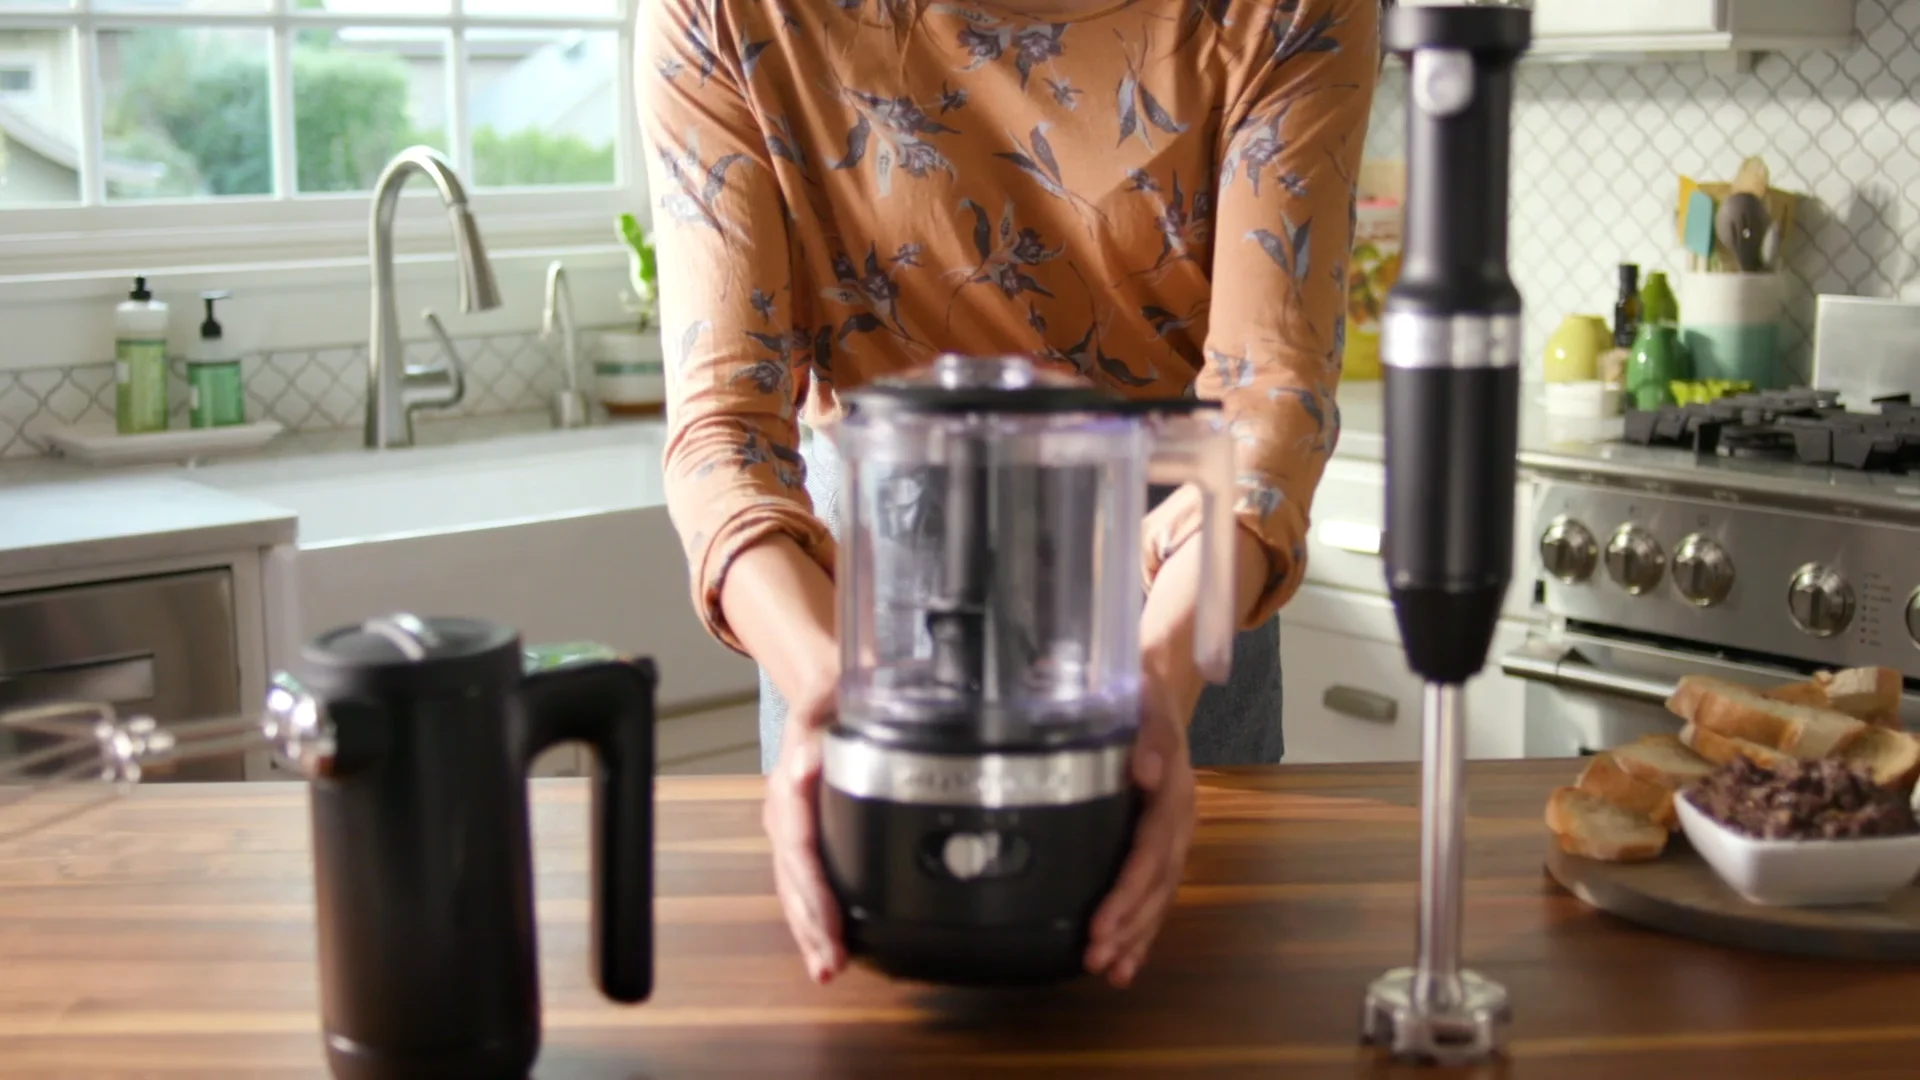 How to use the cordless food chopper video from KitchenAid on Vimeo